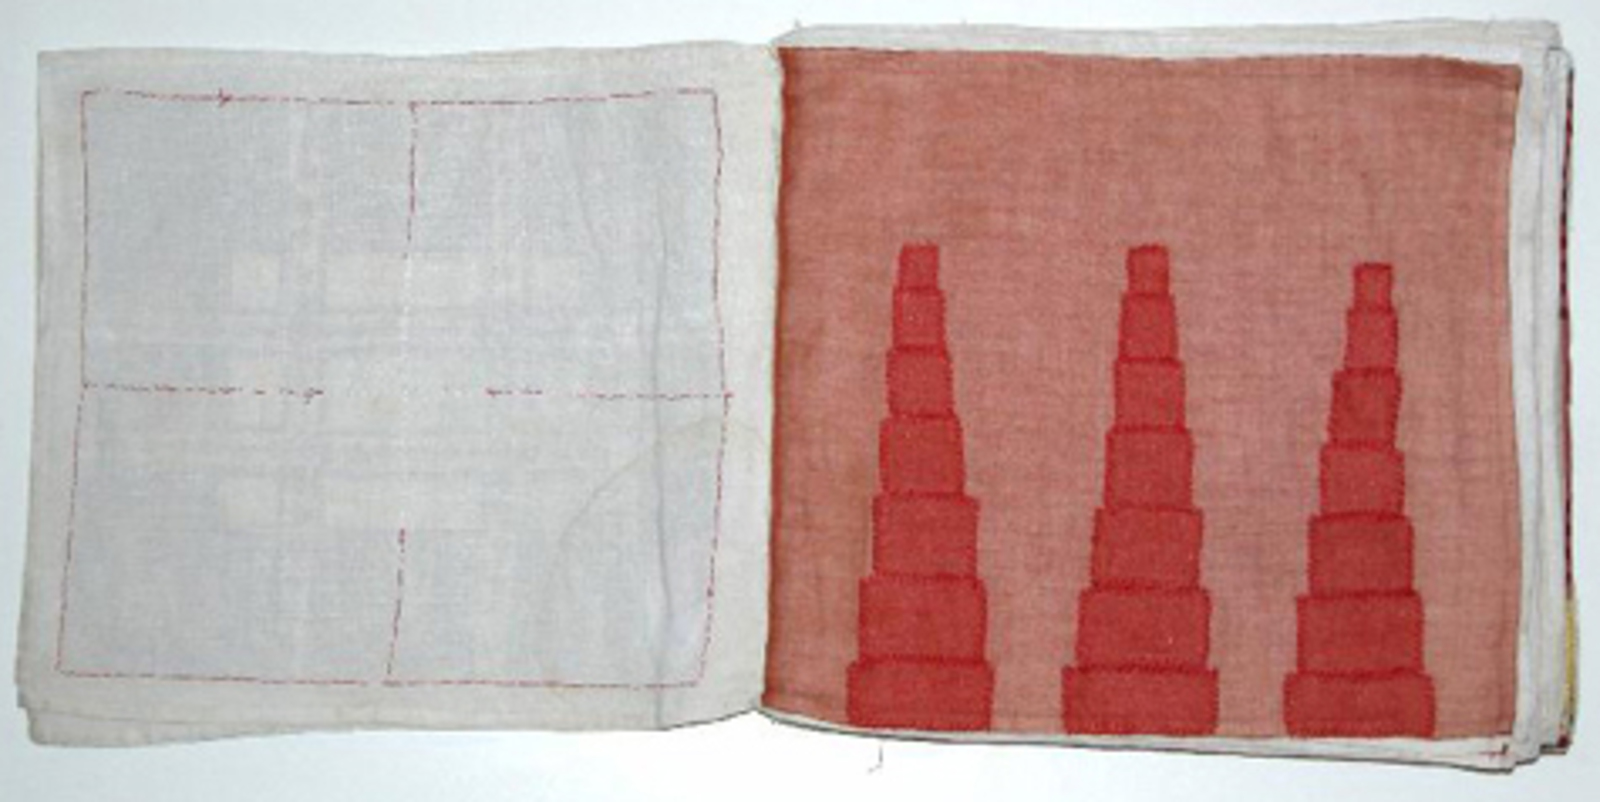 Louise Bourgeois, the cloth book Ode à l'oubli, 2002 – detail